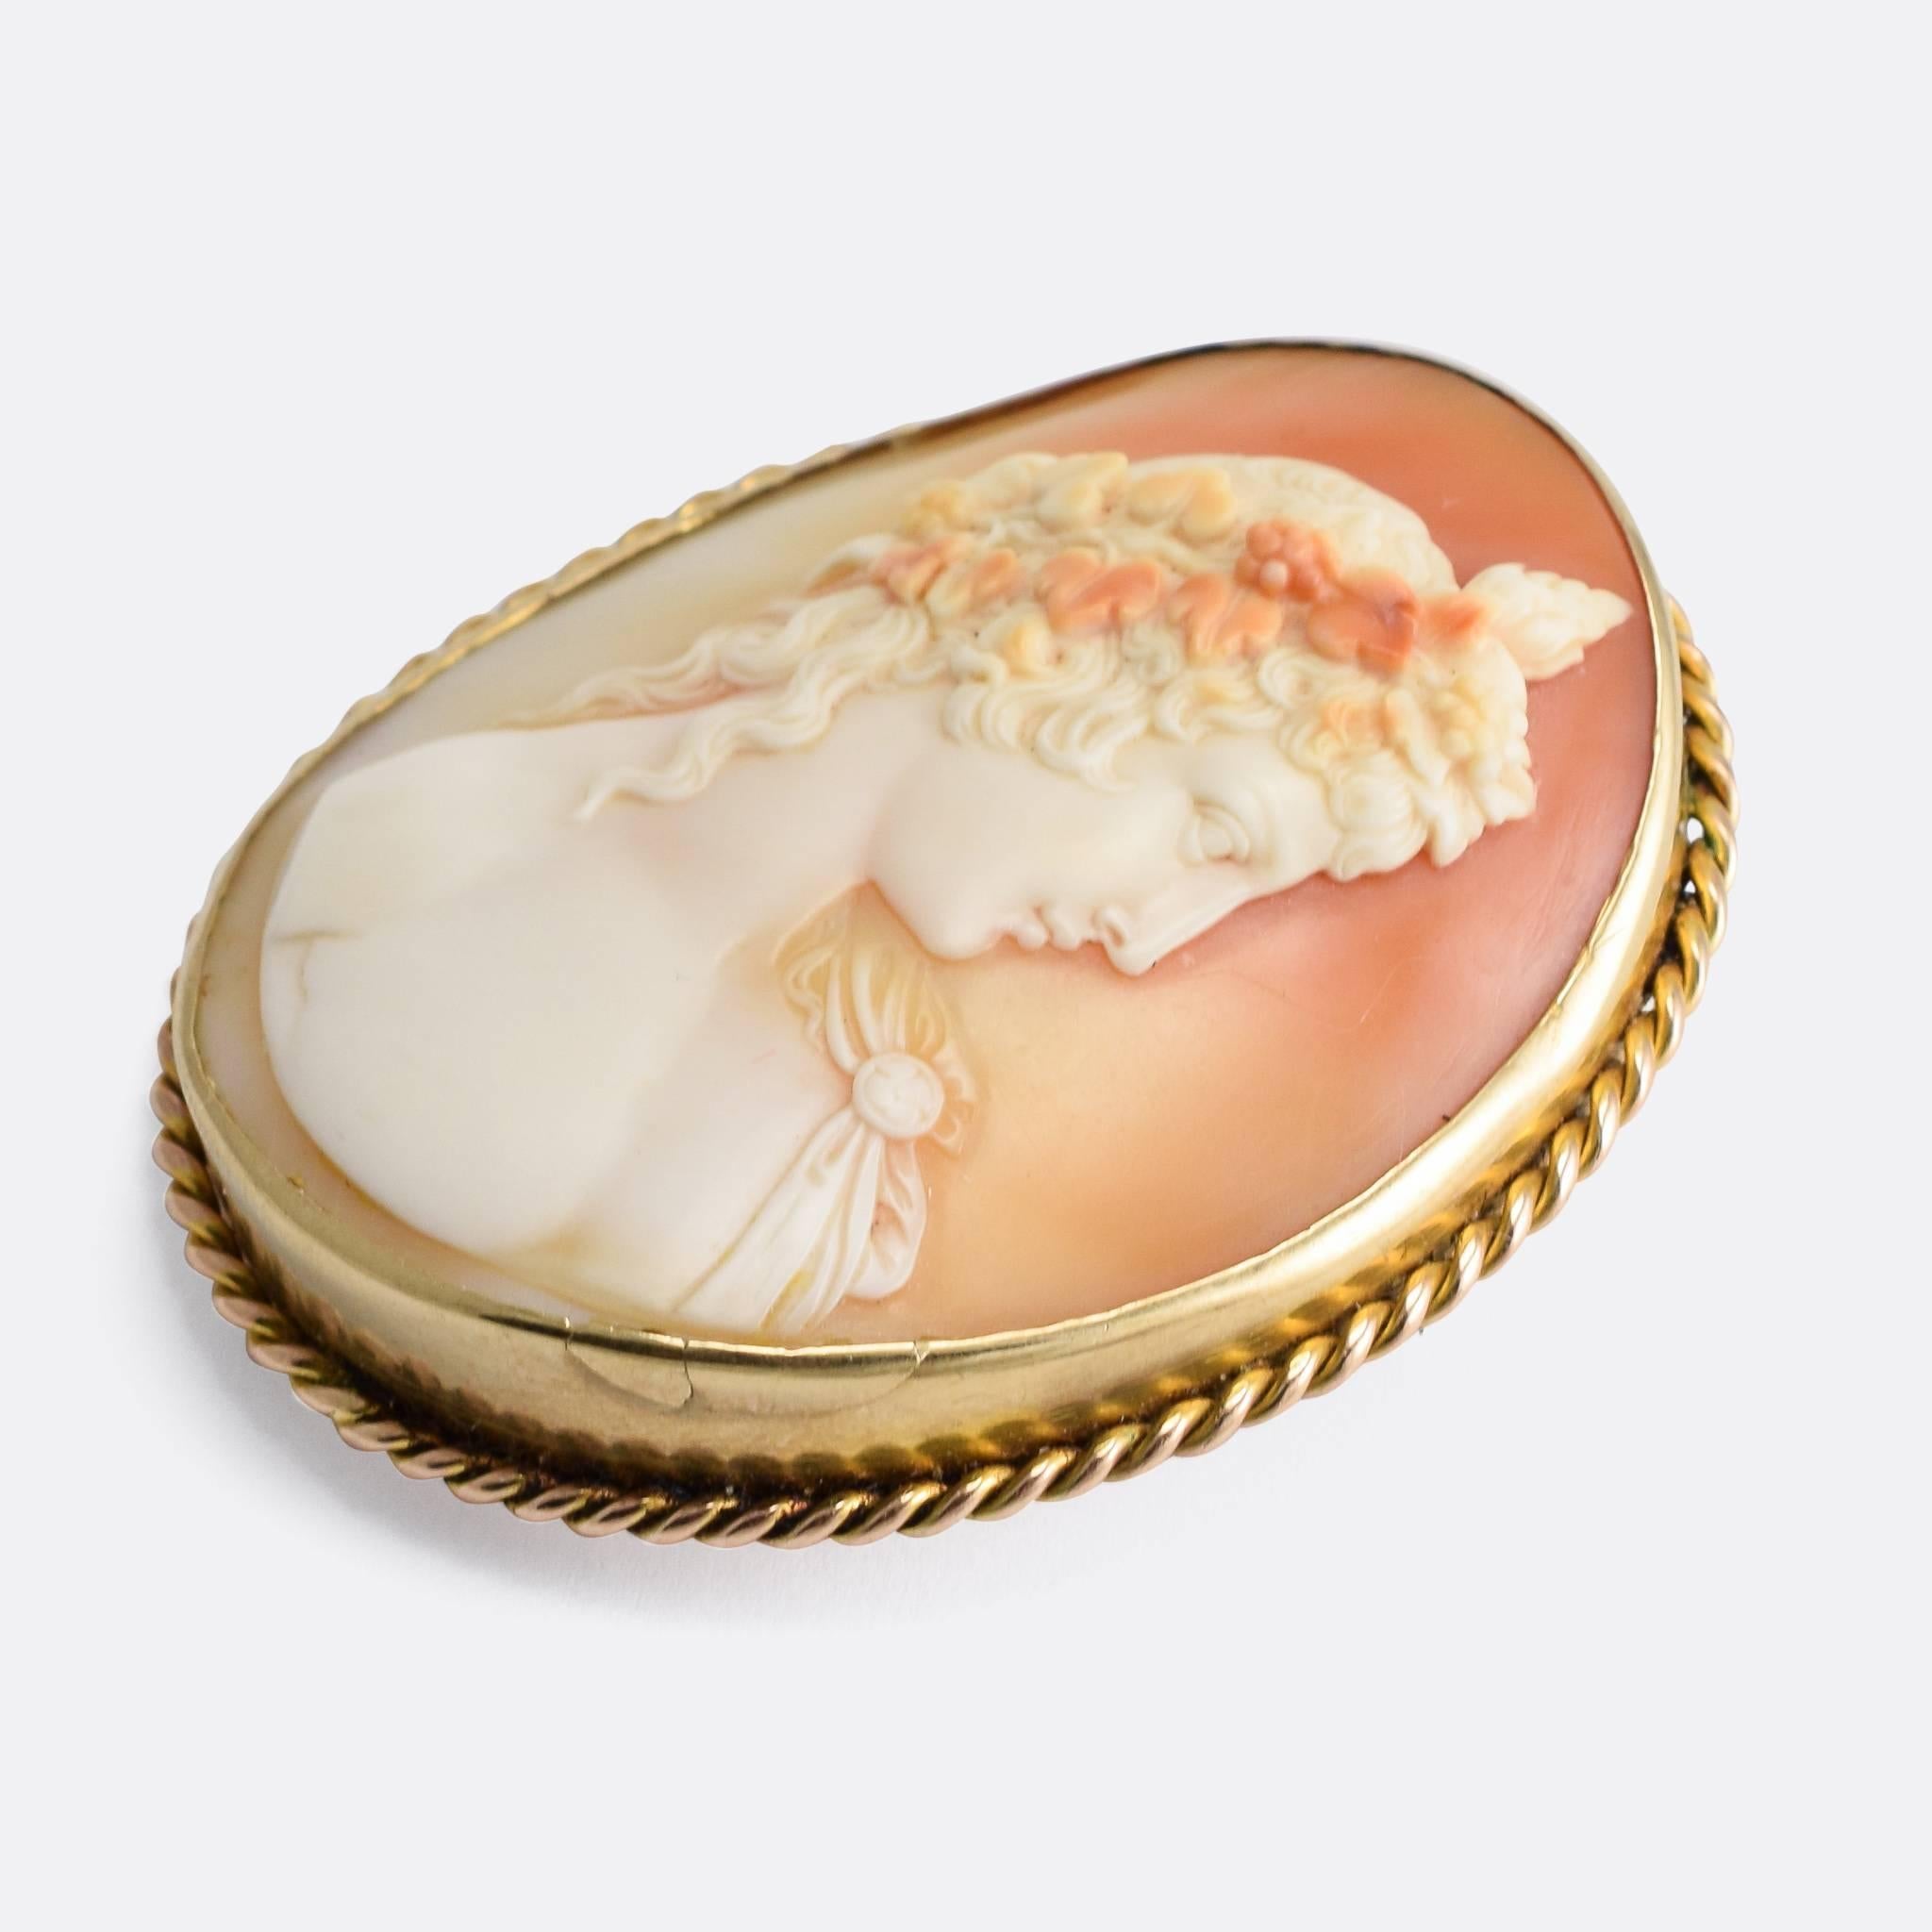 A stunning antique cameo brooch depicting Antinous, the Emperor Hadrian's lover. Hadrian was introduced to Antinous in 123 AD and became instantly besotted on account of his angelic beauty. Antinous accompanied Hadrian during his attendance of the